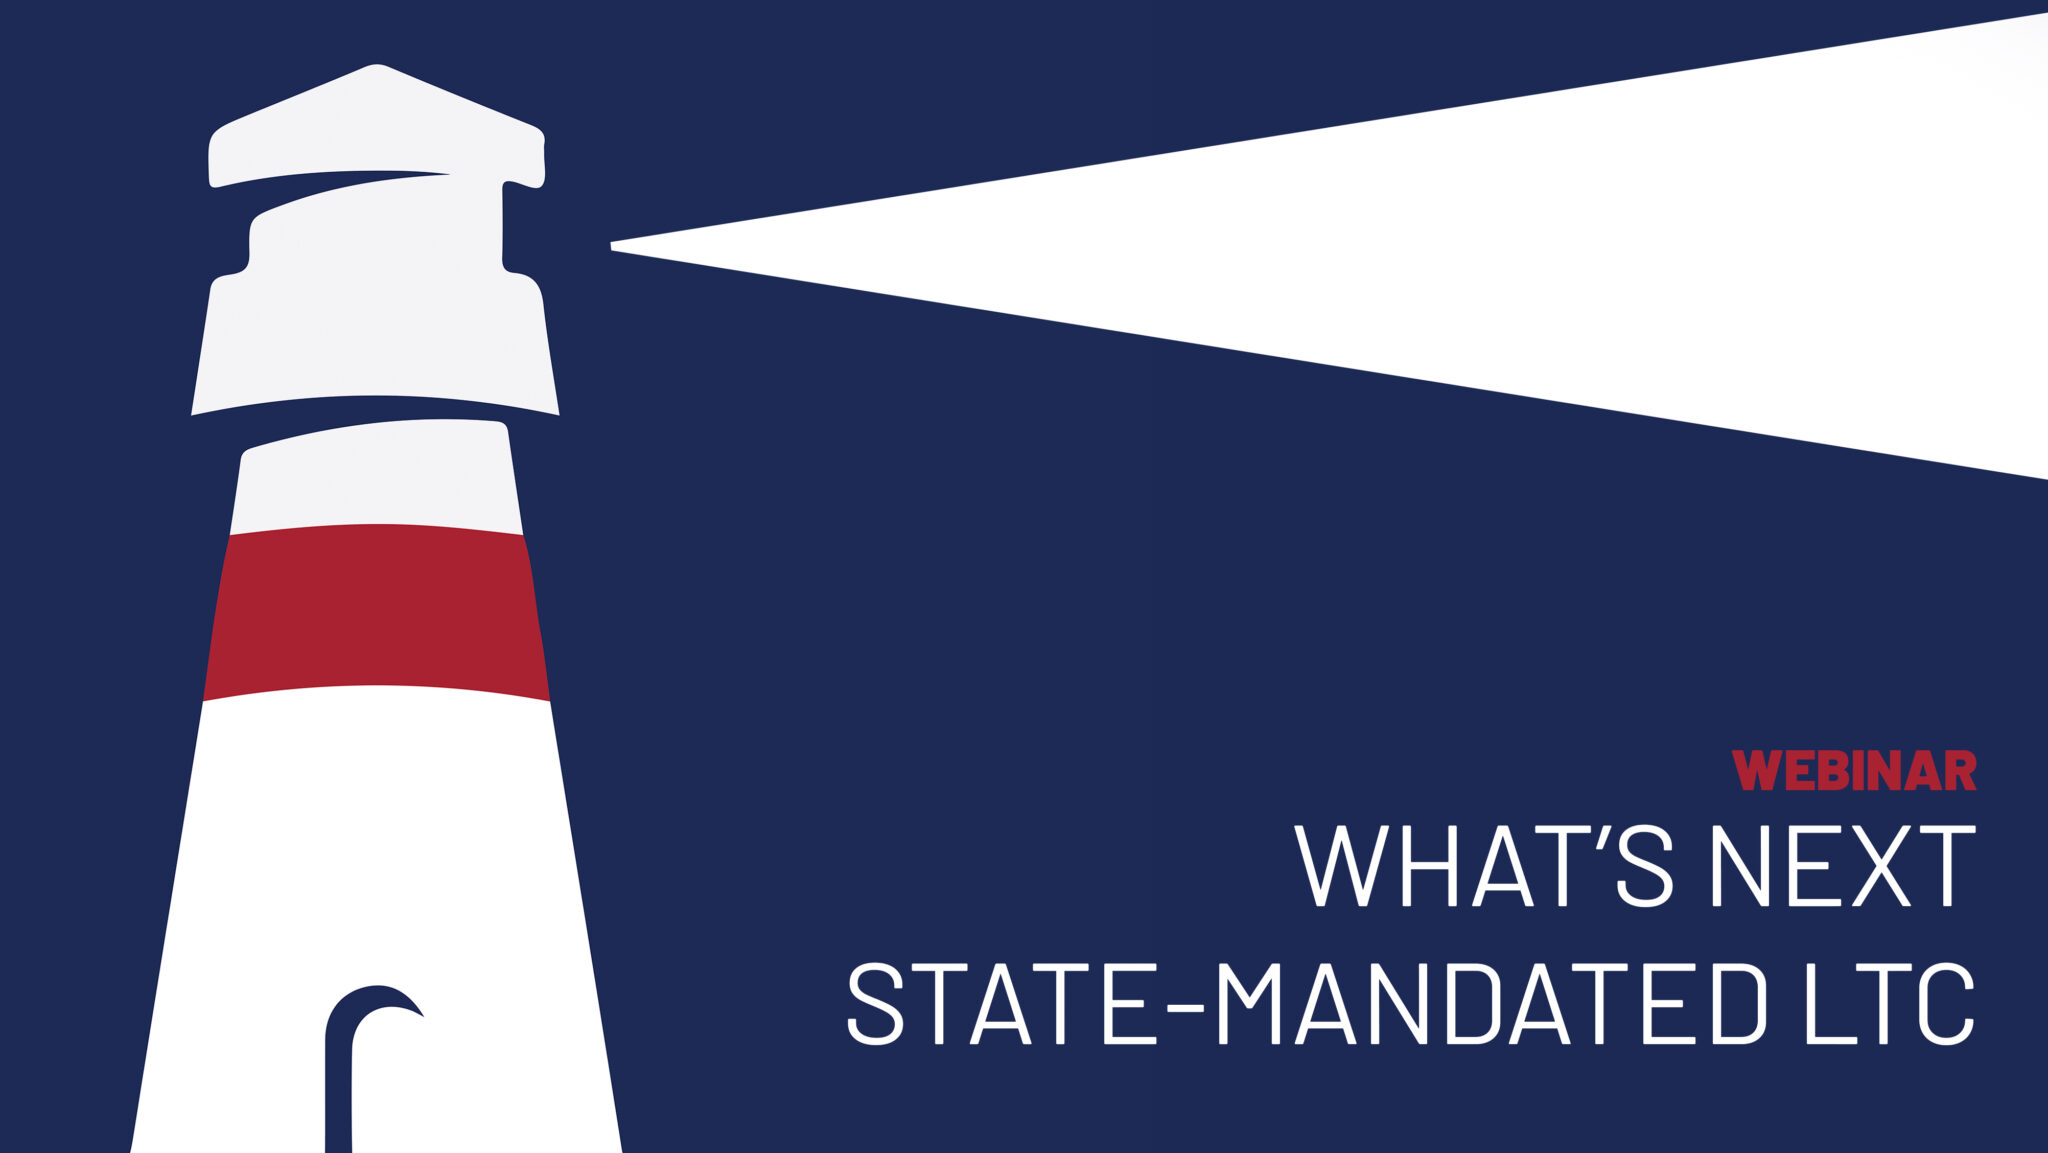 Webinar: What’s next with state-mandated LTC